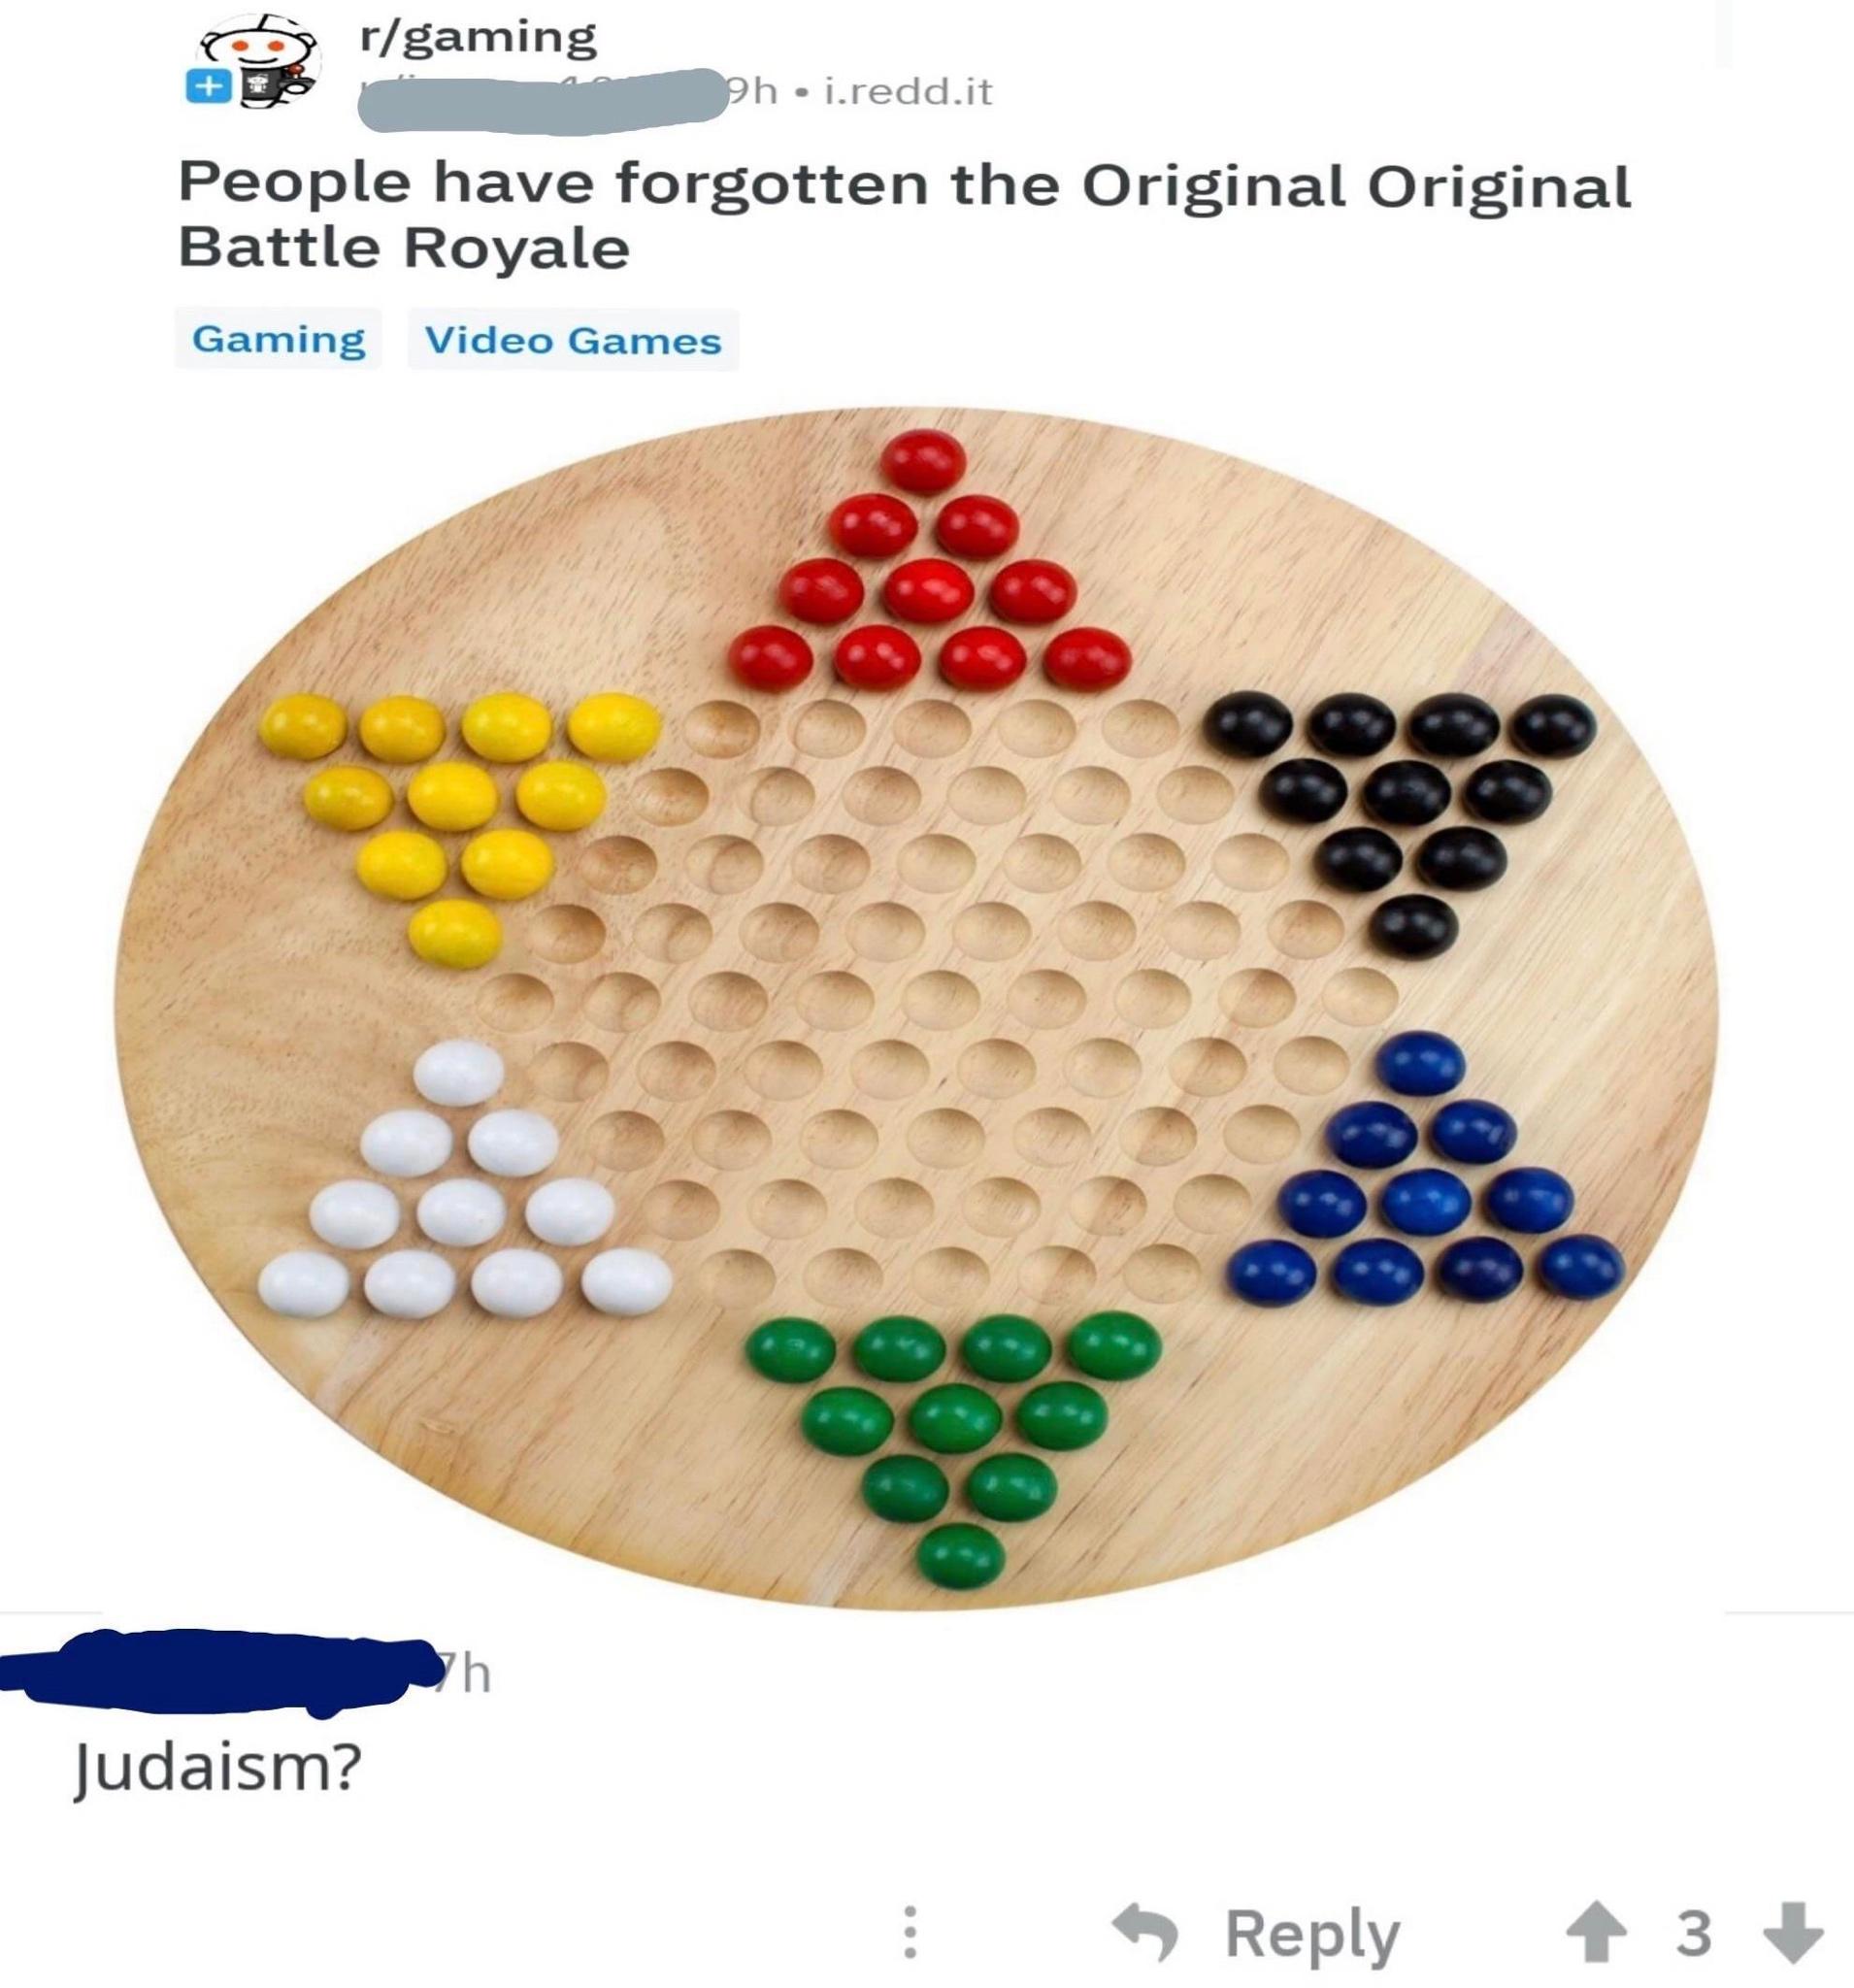 chinese checkers - rgaming Ph.i.redd.it People have forgotten the Original Original Battle Royale Gaming Video Games yh Judaism? 3